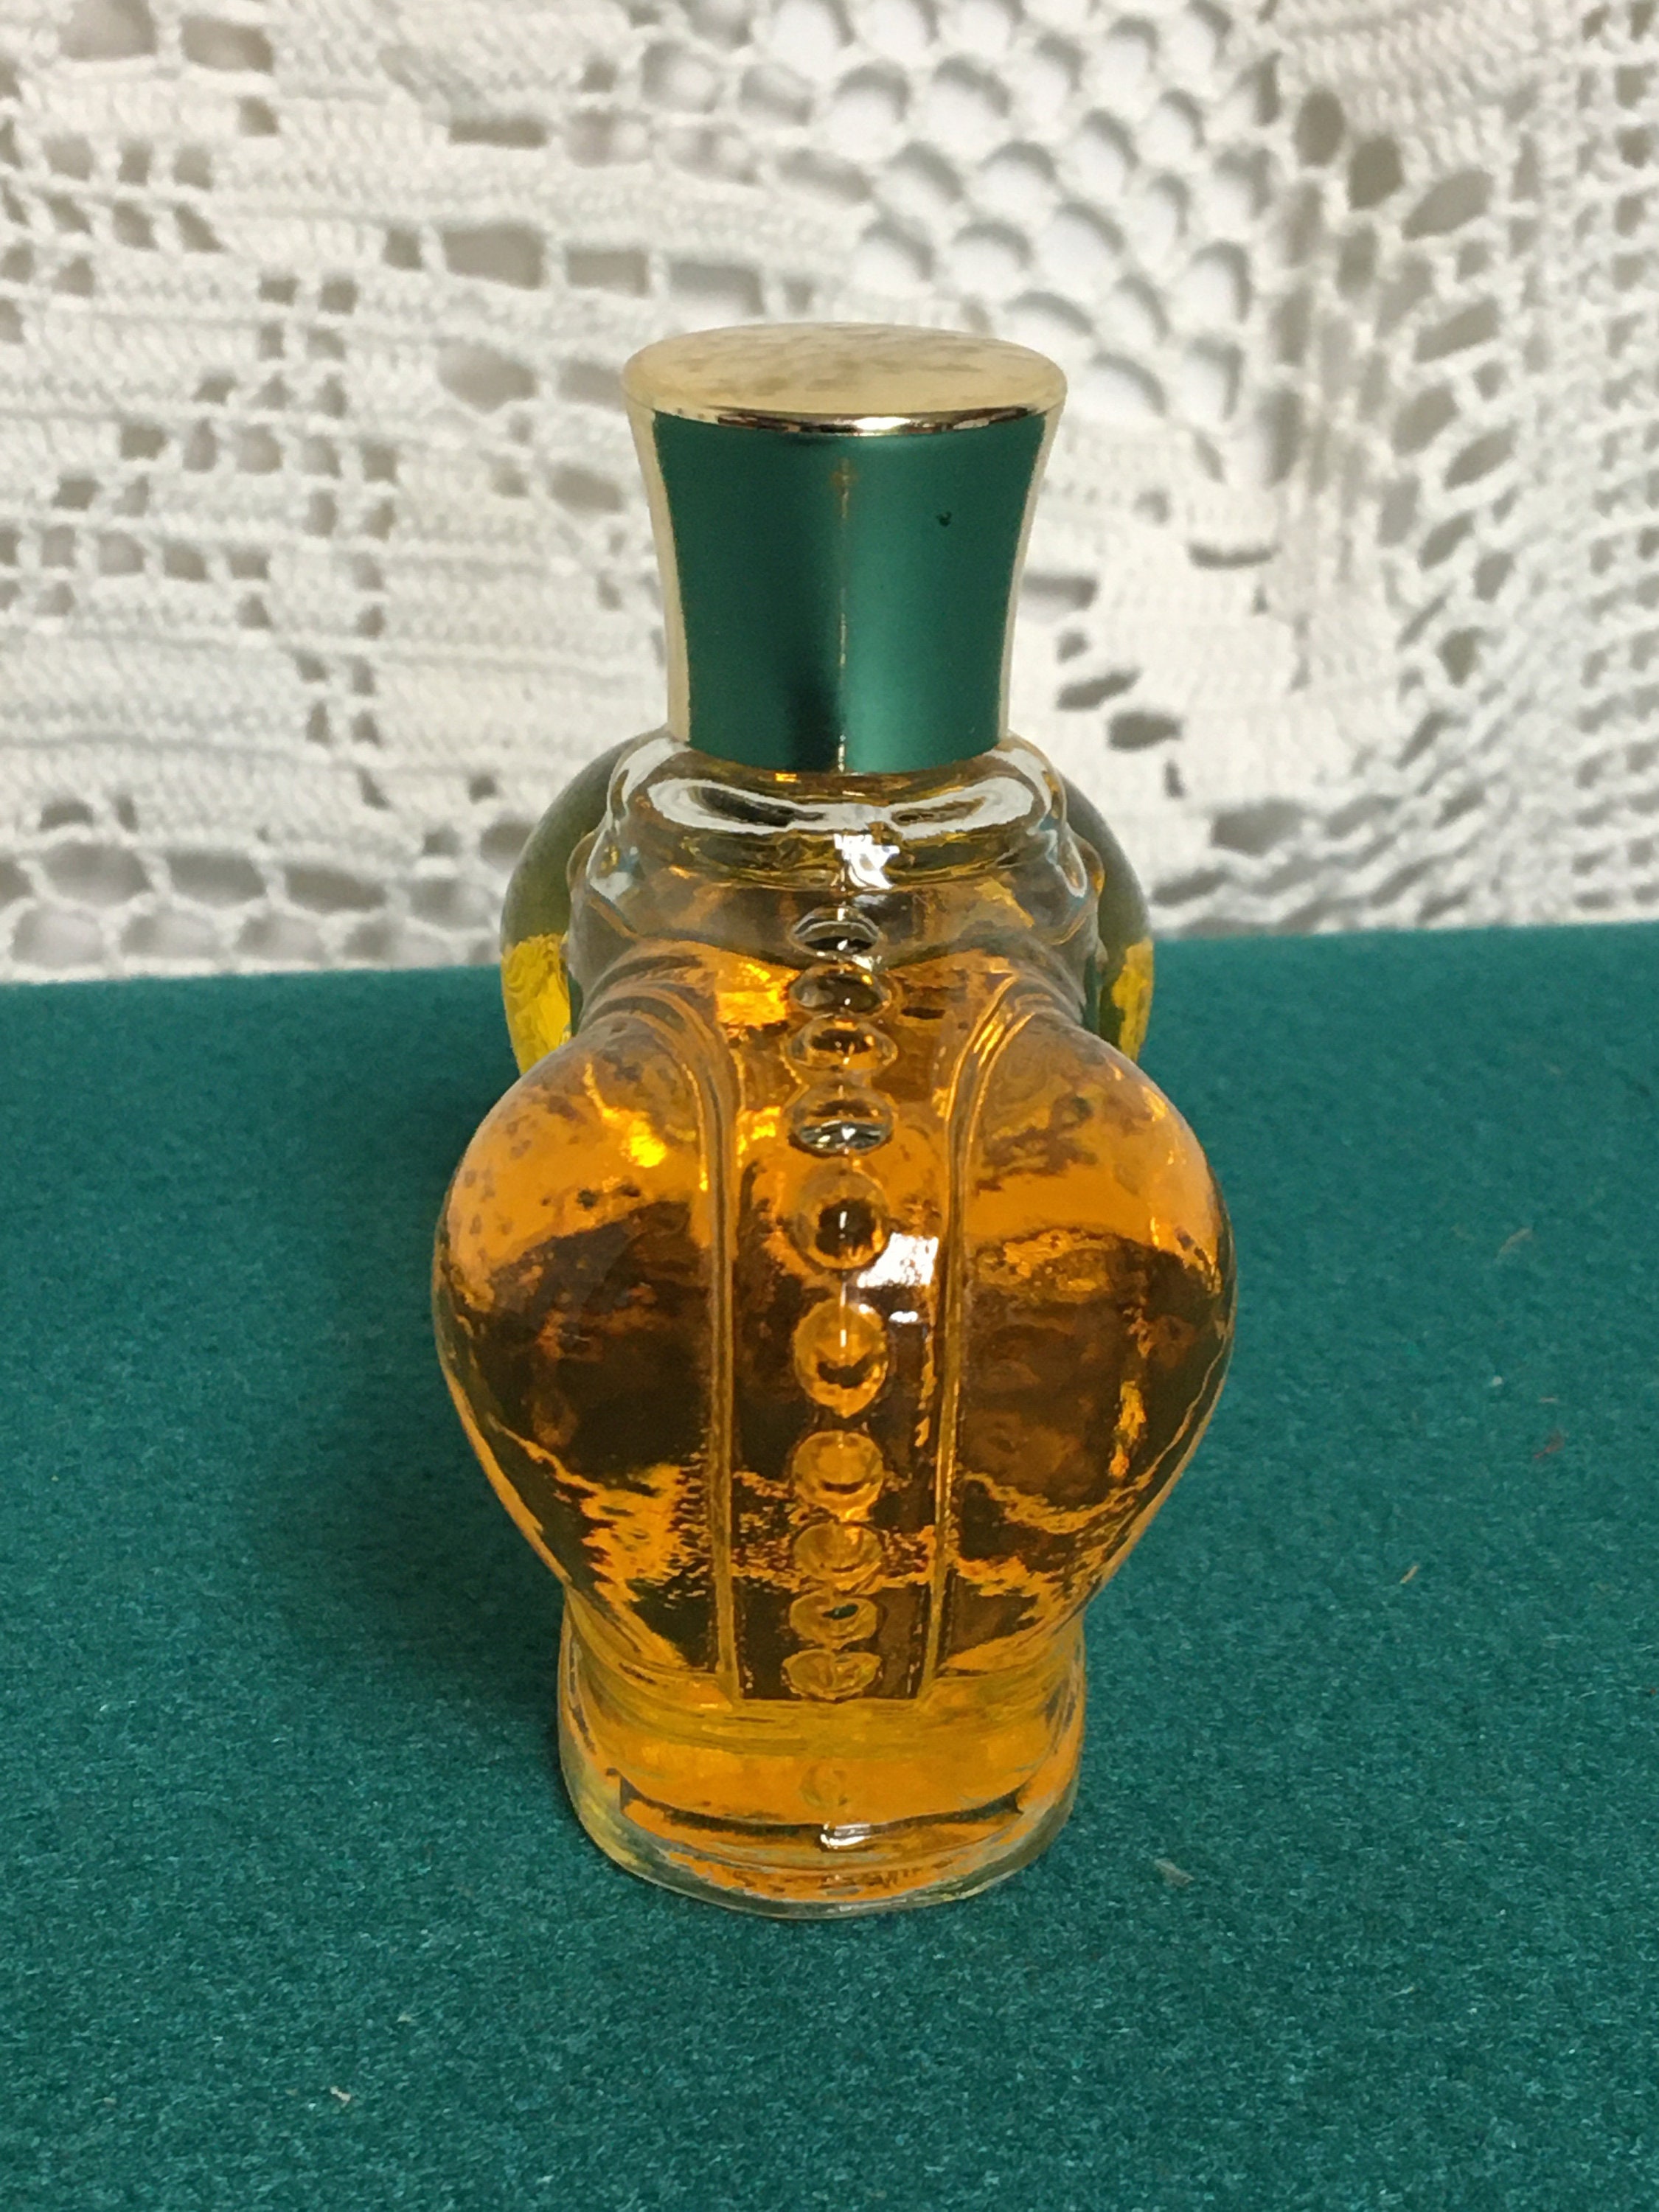 Prince Matchabelli Wind Song Cologne in Crown Bottle, Vintage Perfume ...